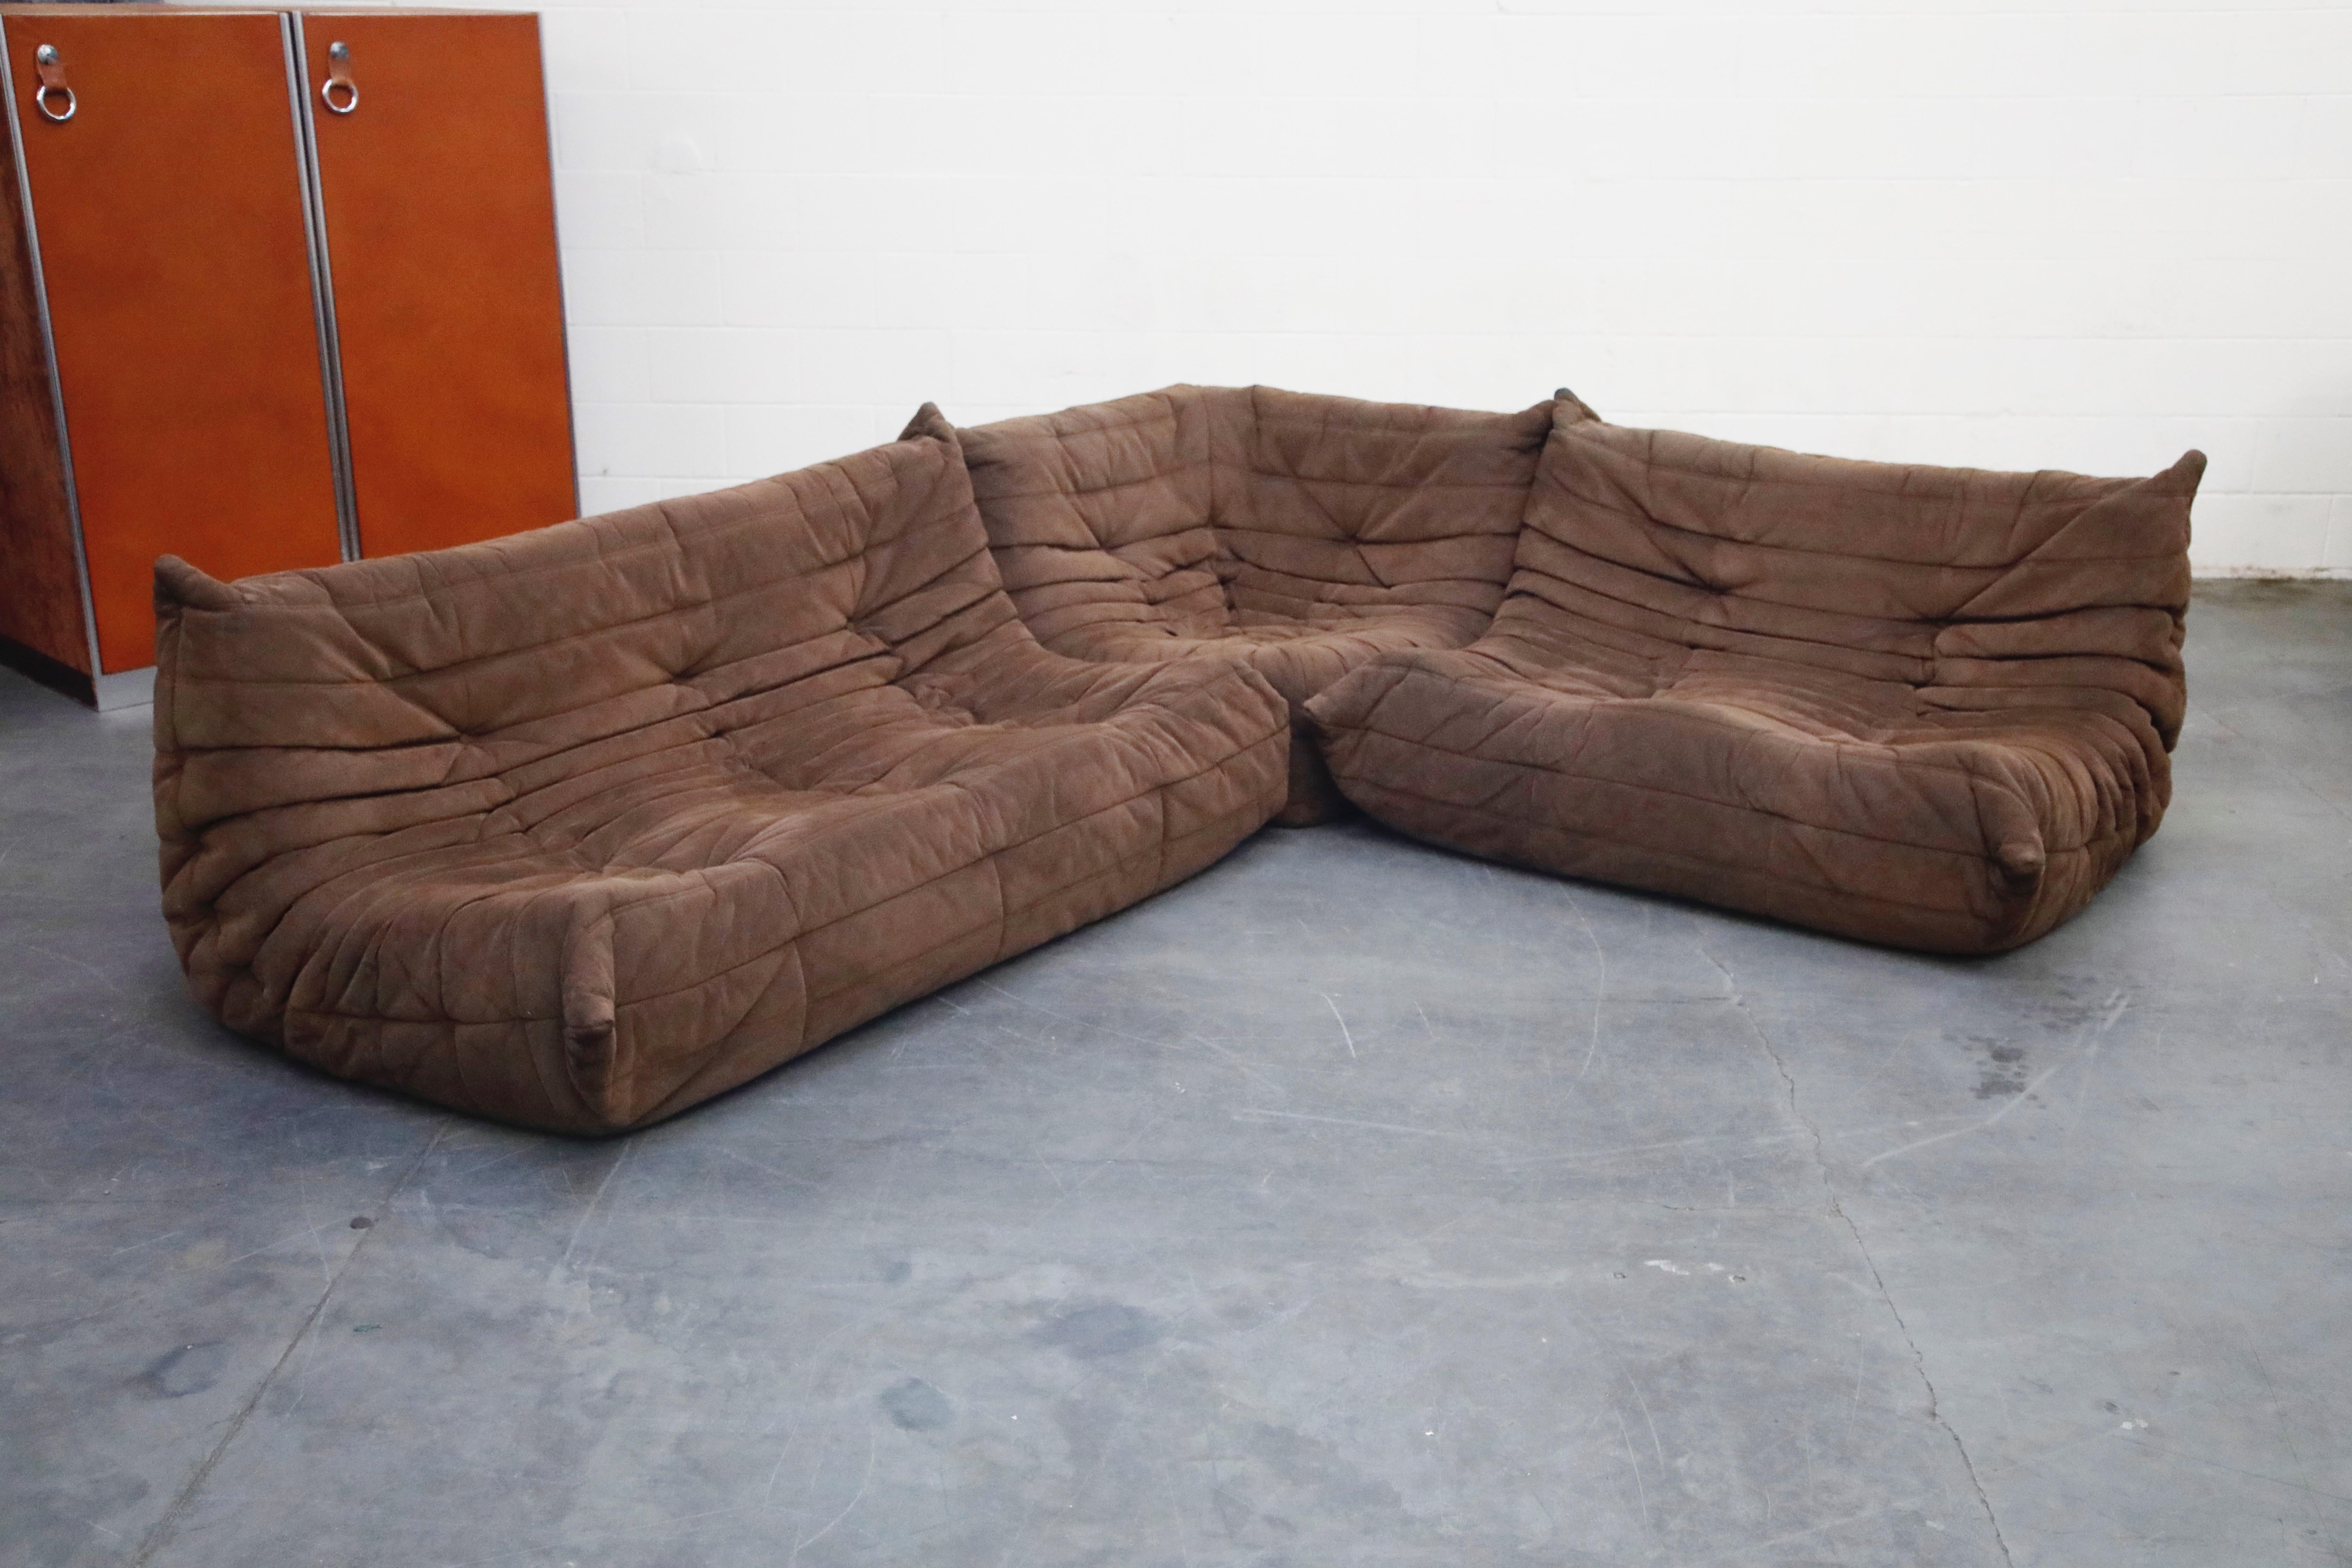 This incredible five (5)-piece Togo sectional living room set, was designed by Michel Ducaroy in 1973 for Ligne Roset, France. Signed with Ligne Roset underside decking fabric and labels on each piece. Originally designed in the 1970s, this set